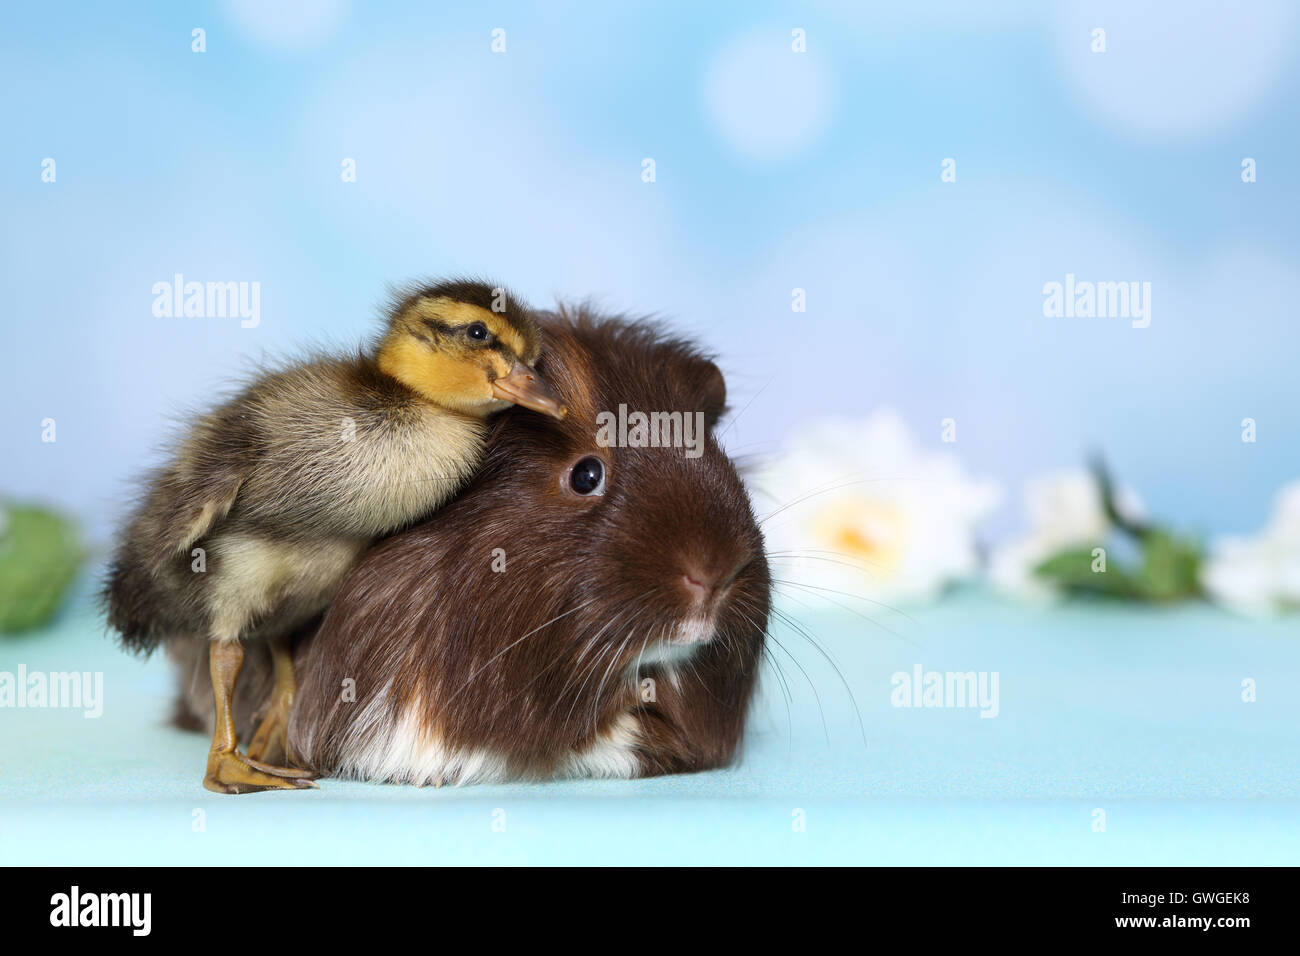 Indian Runner Duck. Duckling cuddling up to long-haired guinea pig. Studio picture against a blue background. Germany Stock Photo